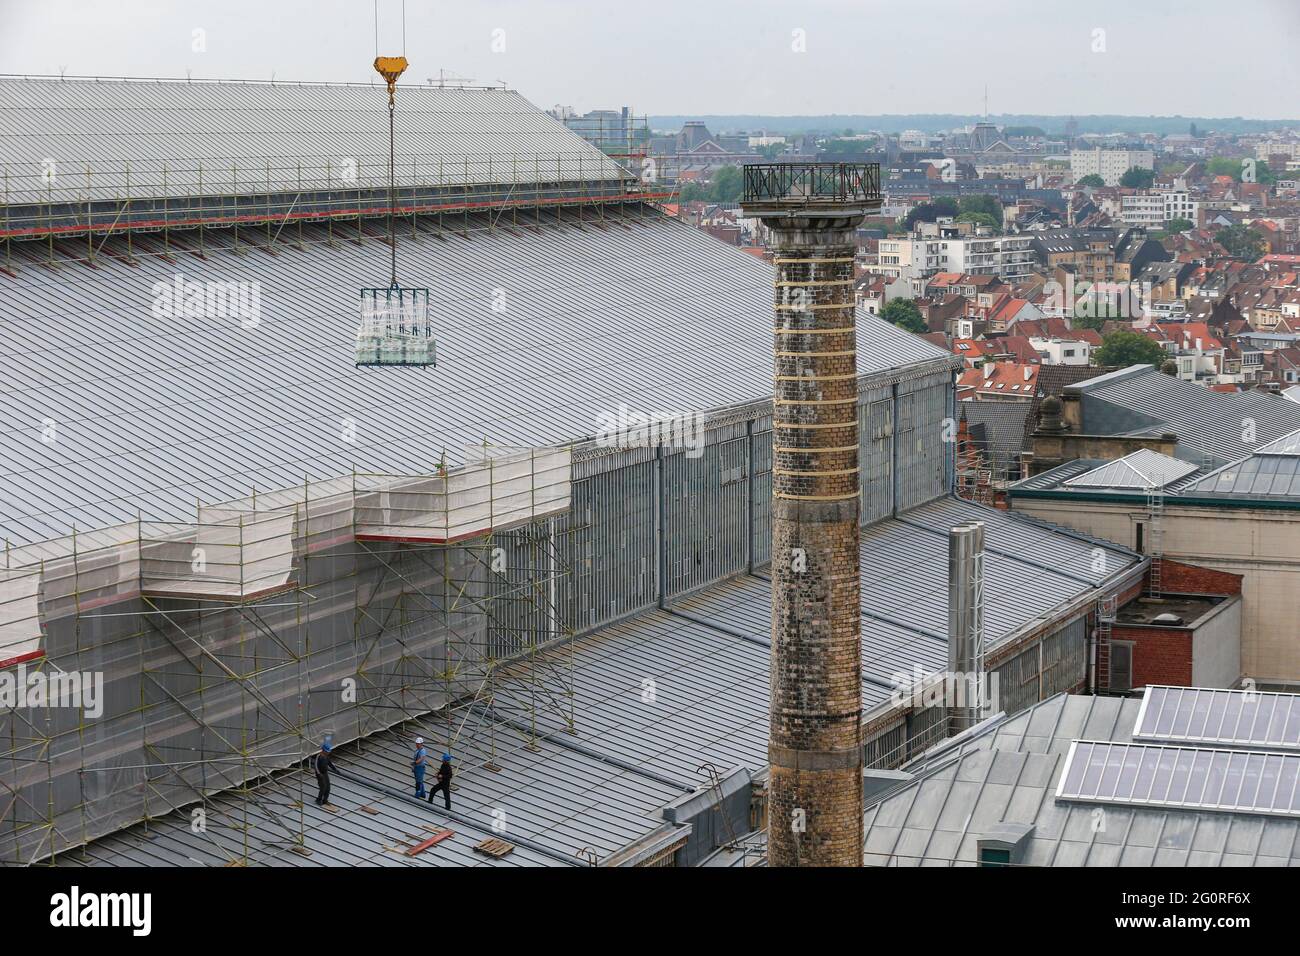 Illustration picture shows a visit to the progress of the renovation of the roofs of the Jubelpark/ Parc du Cinquantenaire museums, Thursday 03 June 2 Stock Photo